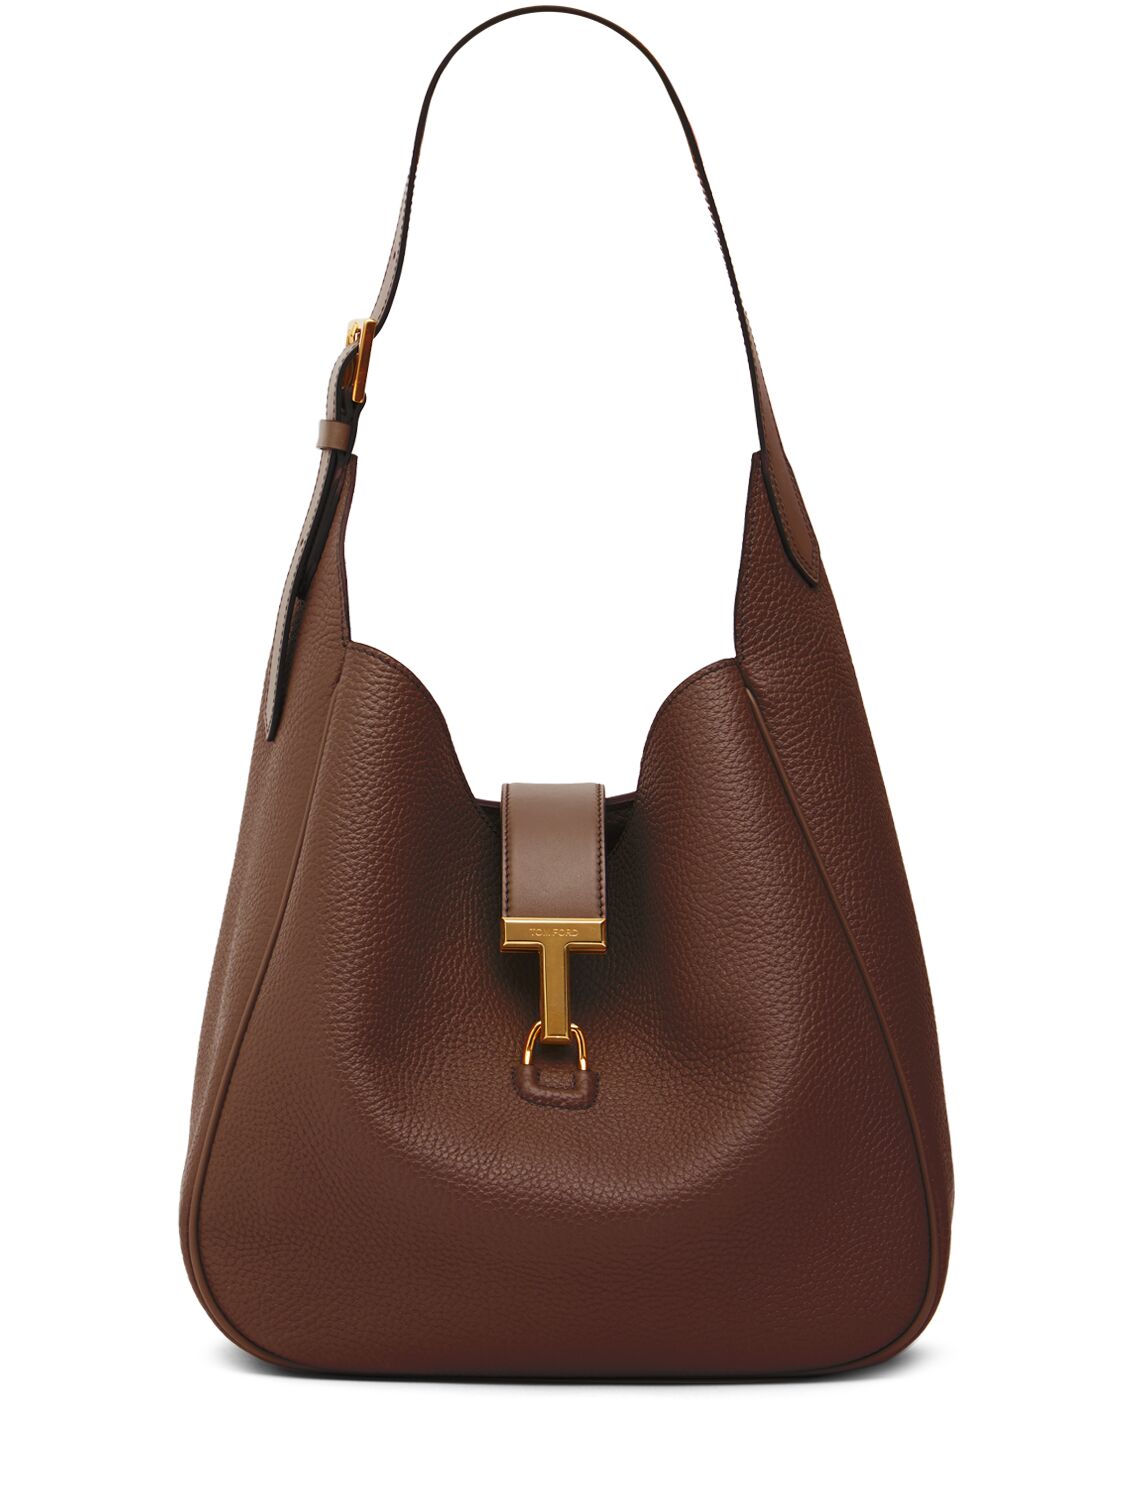 Tom Ford Medium Monarch Leather Bag In Saddle Brown